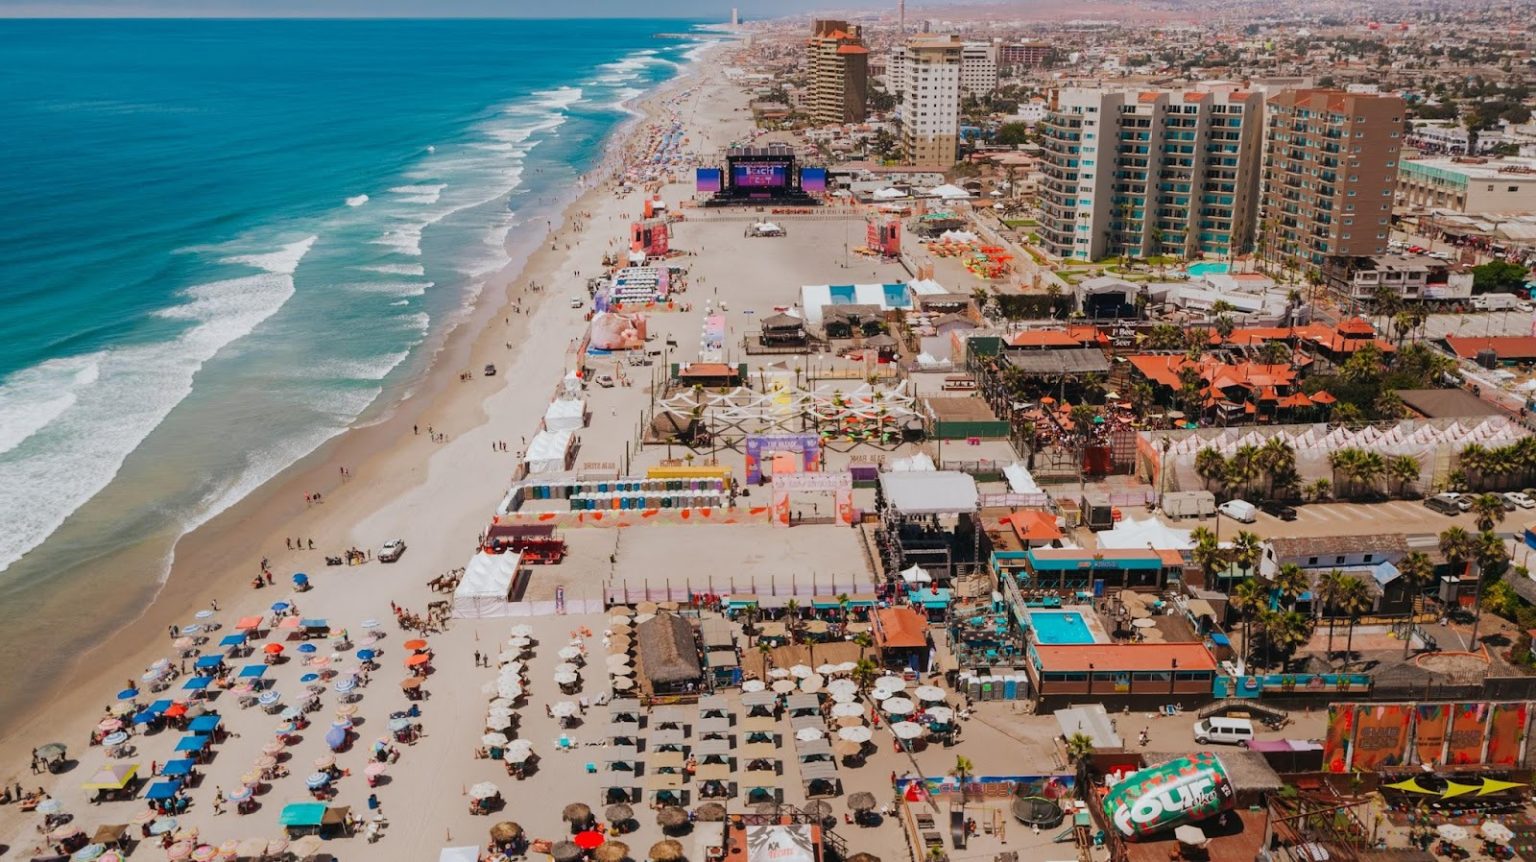 Baja Beach Fest 2022 Announces Lineup Headlined by Daddy Yankee and